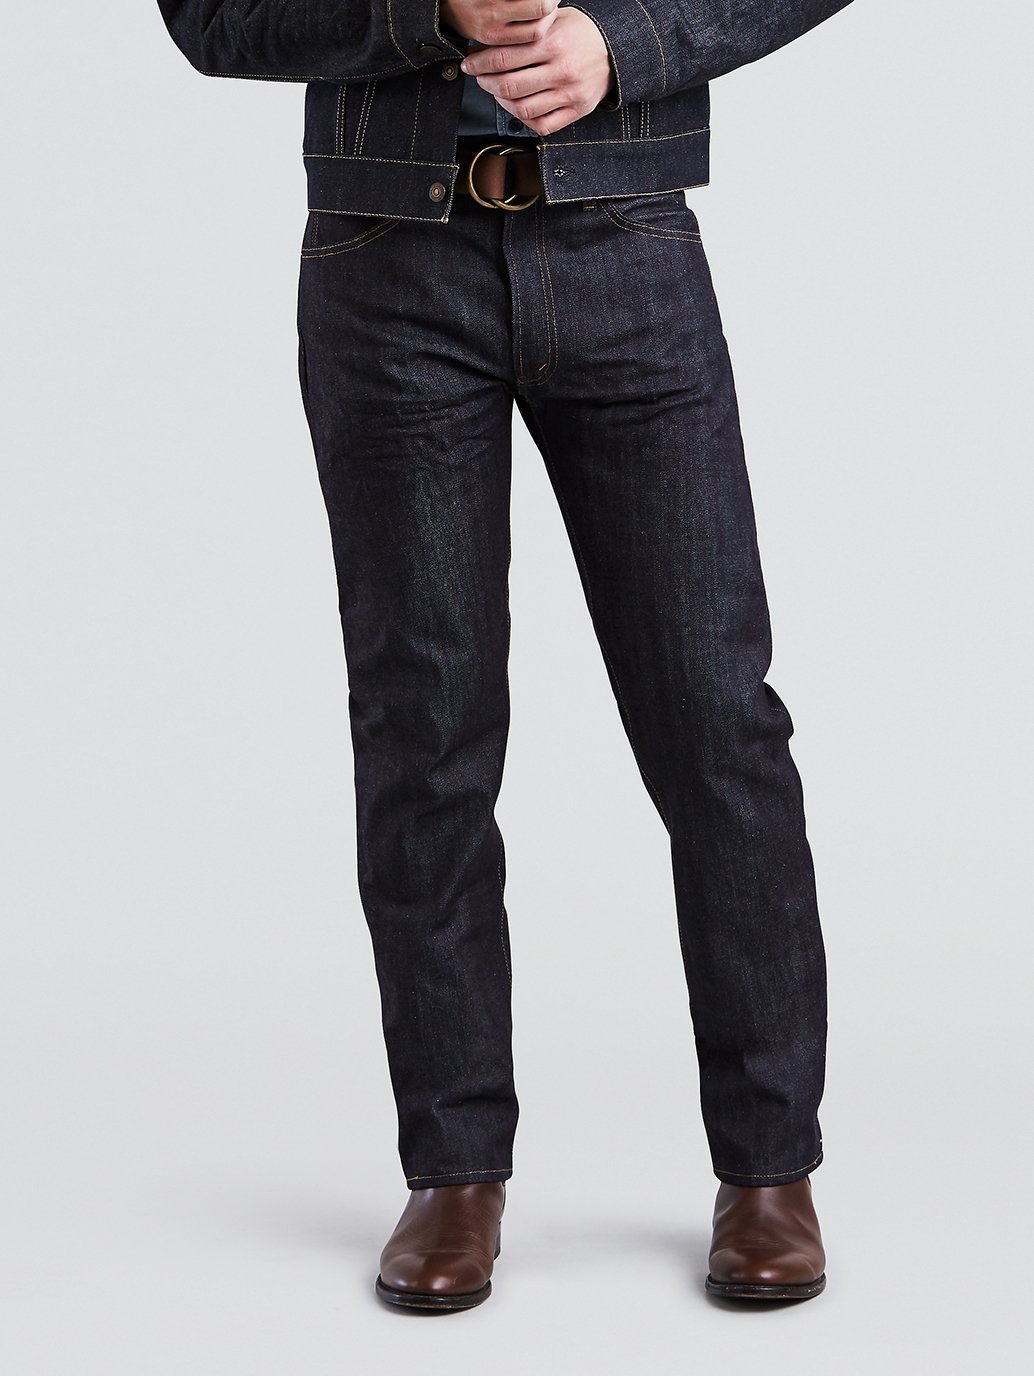 Buy 1967 505™ Jeans | Levi's® Official Online Store MY